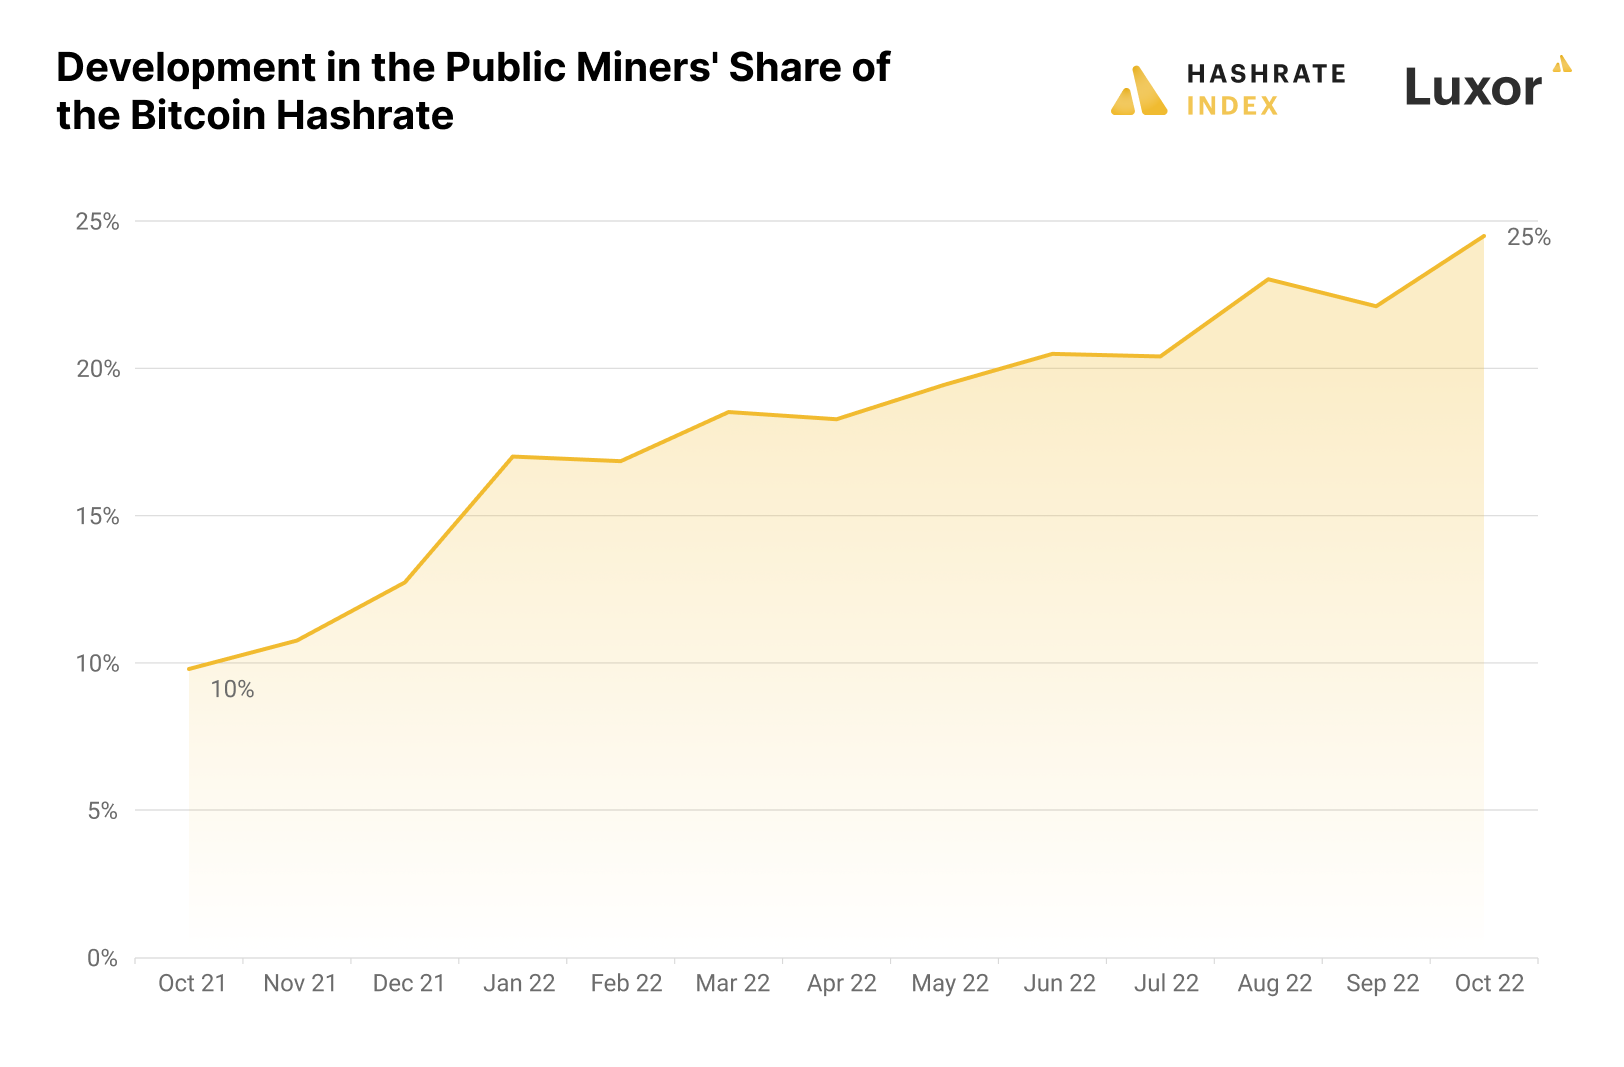 Publicly Traded Bitcoin Mining Firms Account for 25% of Total Bitcoin Hash Rate: Up from 10% a Year Ago